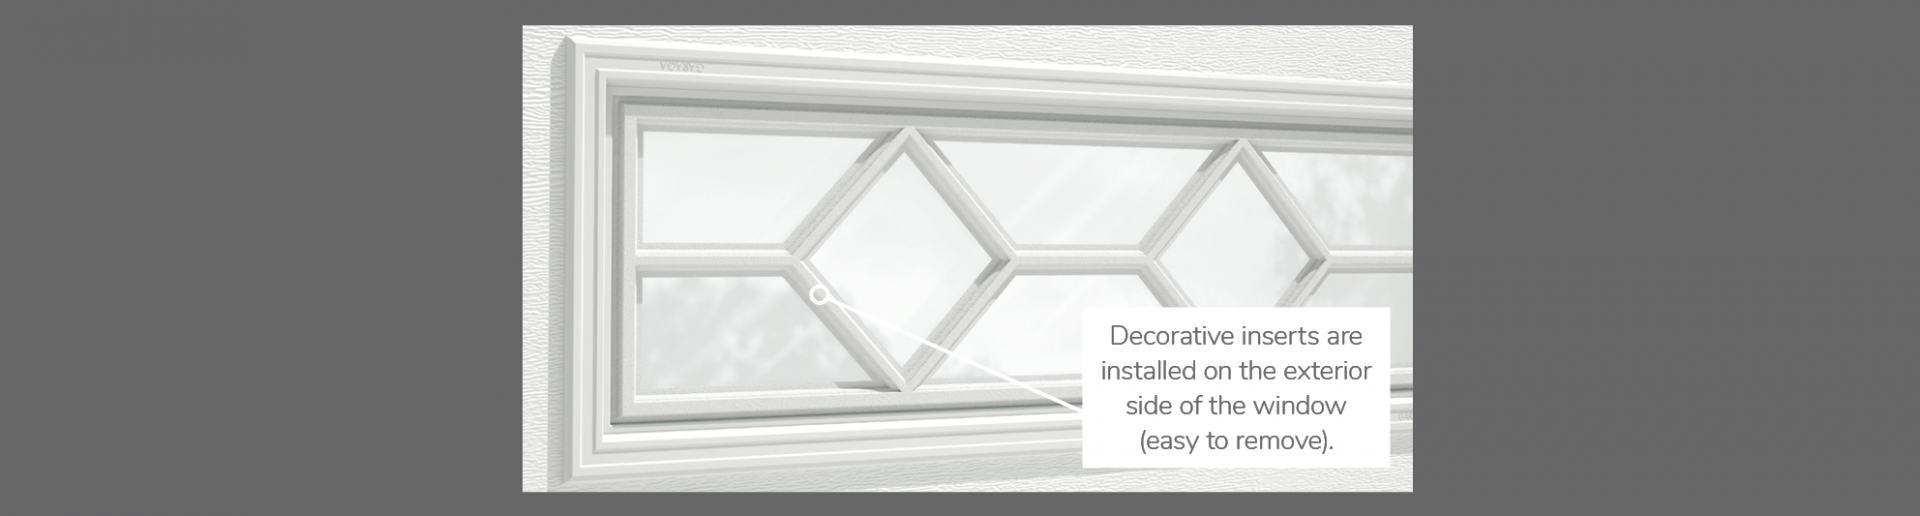 Waterton Decorative Insert, 40" x 13", 21" x 13", 41" x 16" or 20" x 13", available for door R-16, R-12, 3 layers - Polystyrene, 2 layers - Polystyrene and Non-insulated